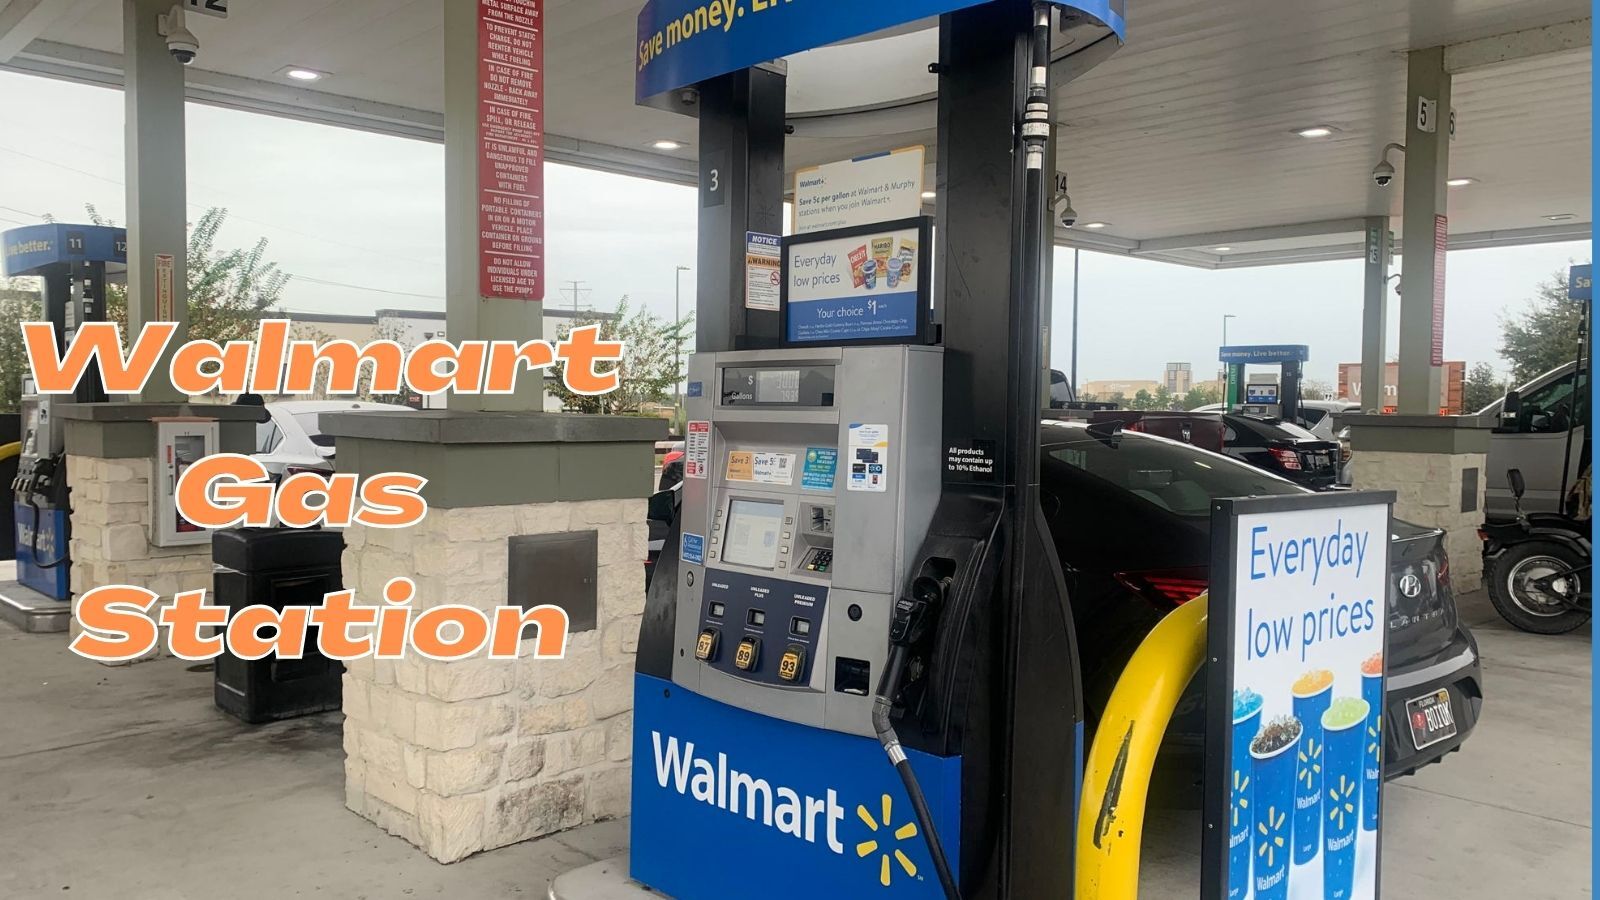 A Complete Guide About Walmart Gas in 2022